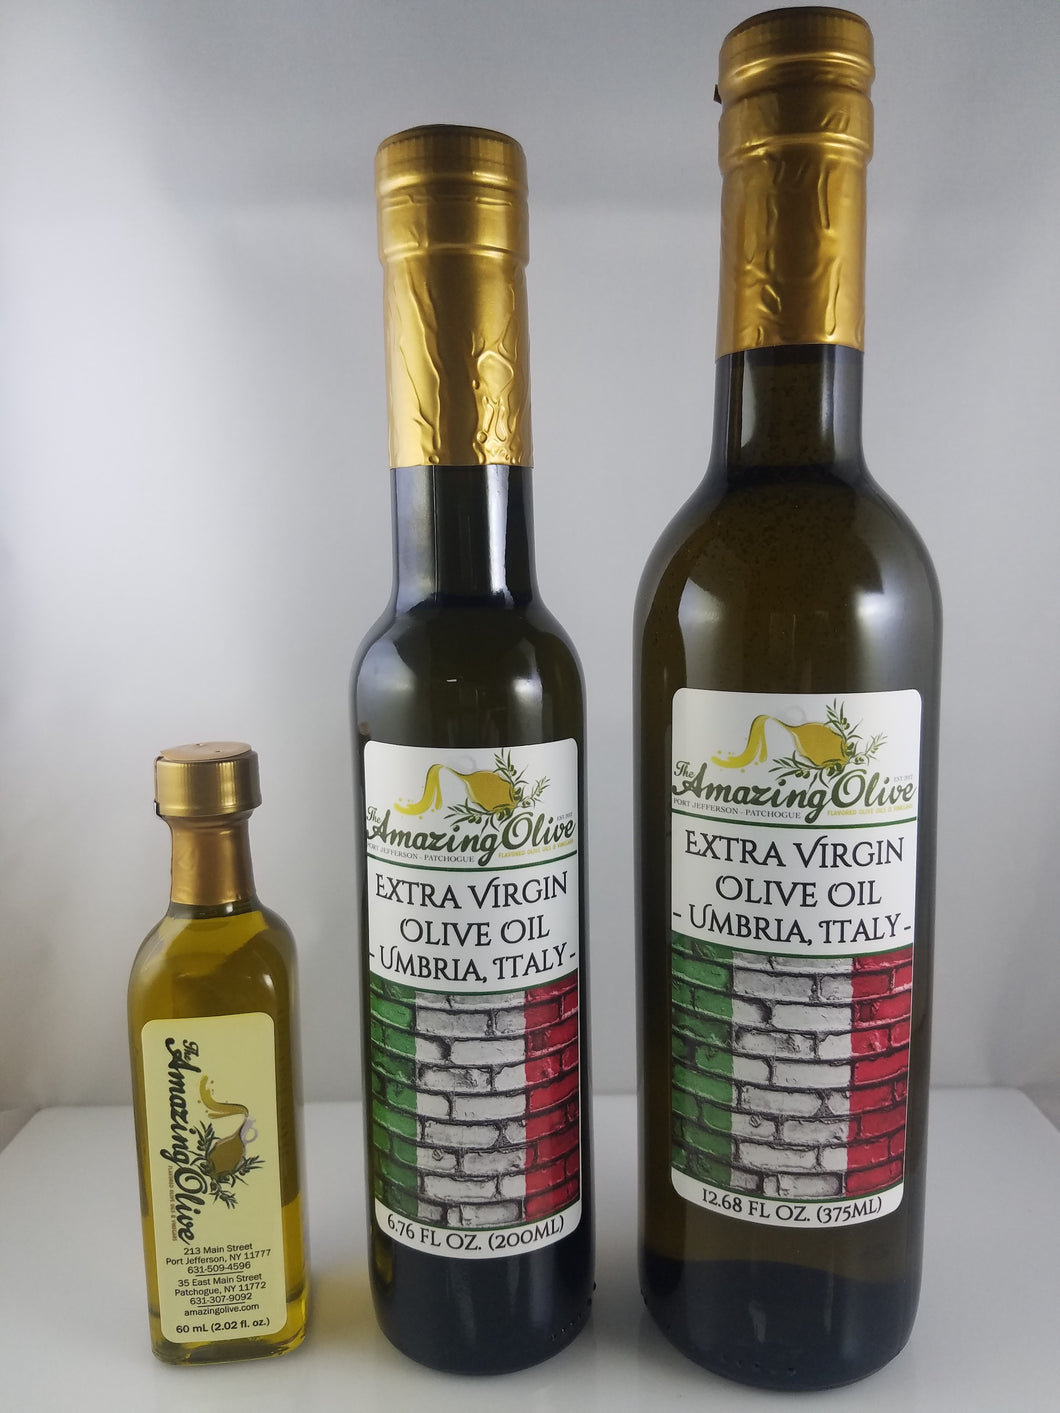 Extra Virgin Olive Oil From Umbria, Italy